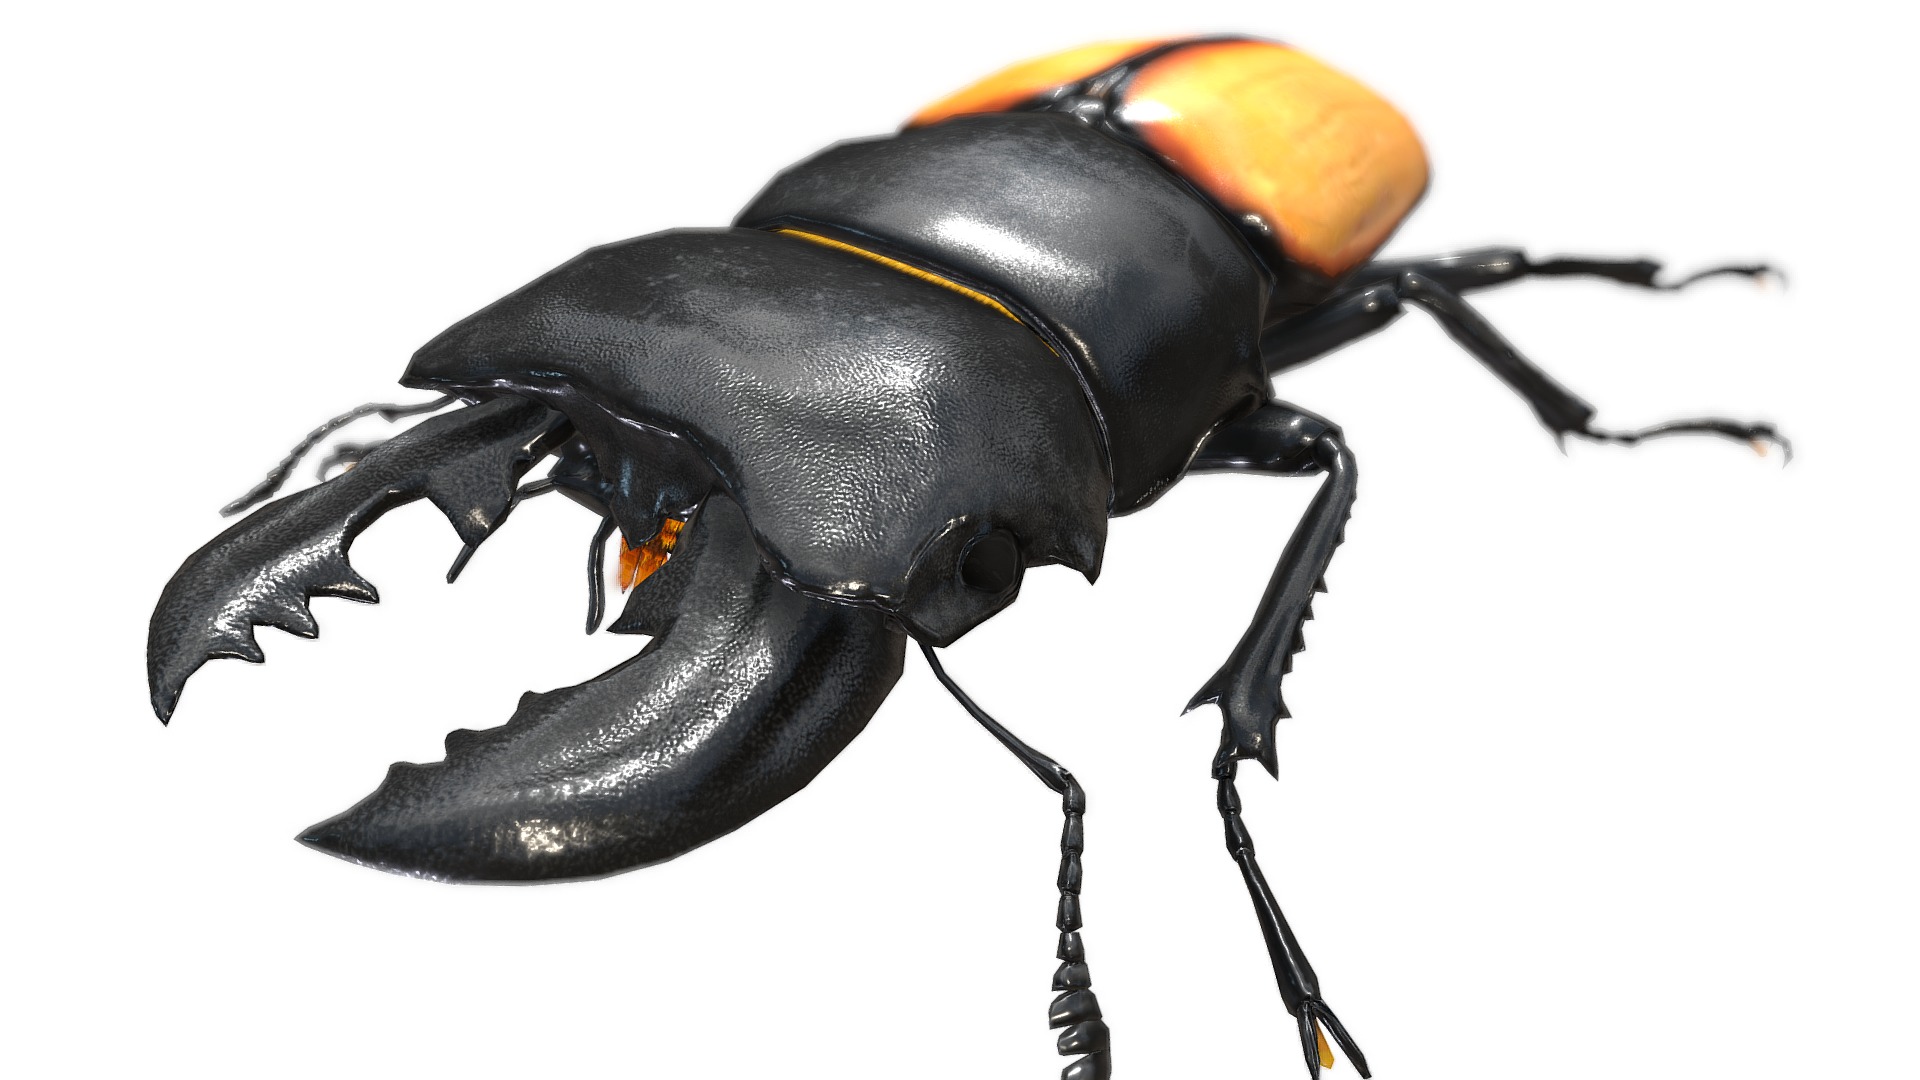 3D model Odontolabis castelnaudi - This is a 3D model of the Odontolabis castelnaudi. The 3D model is about a black and yellow beetle.